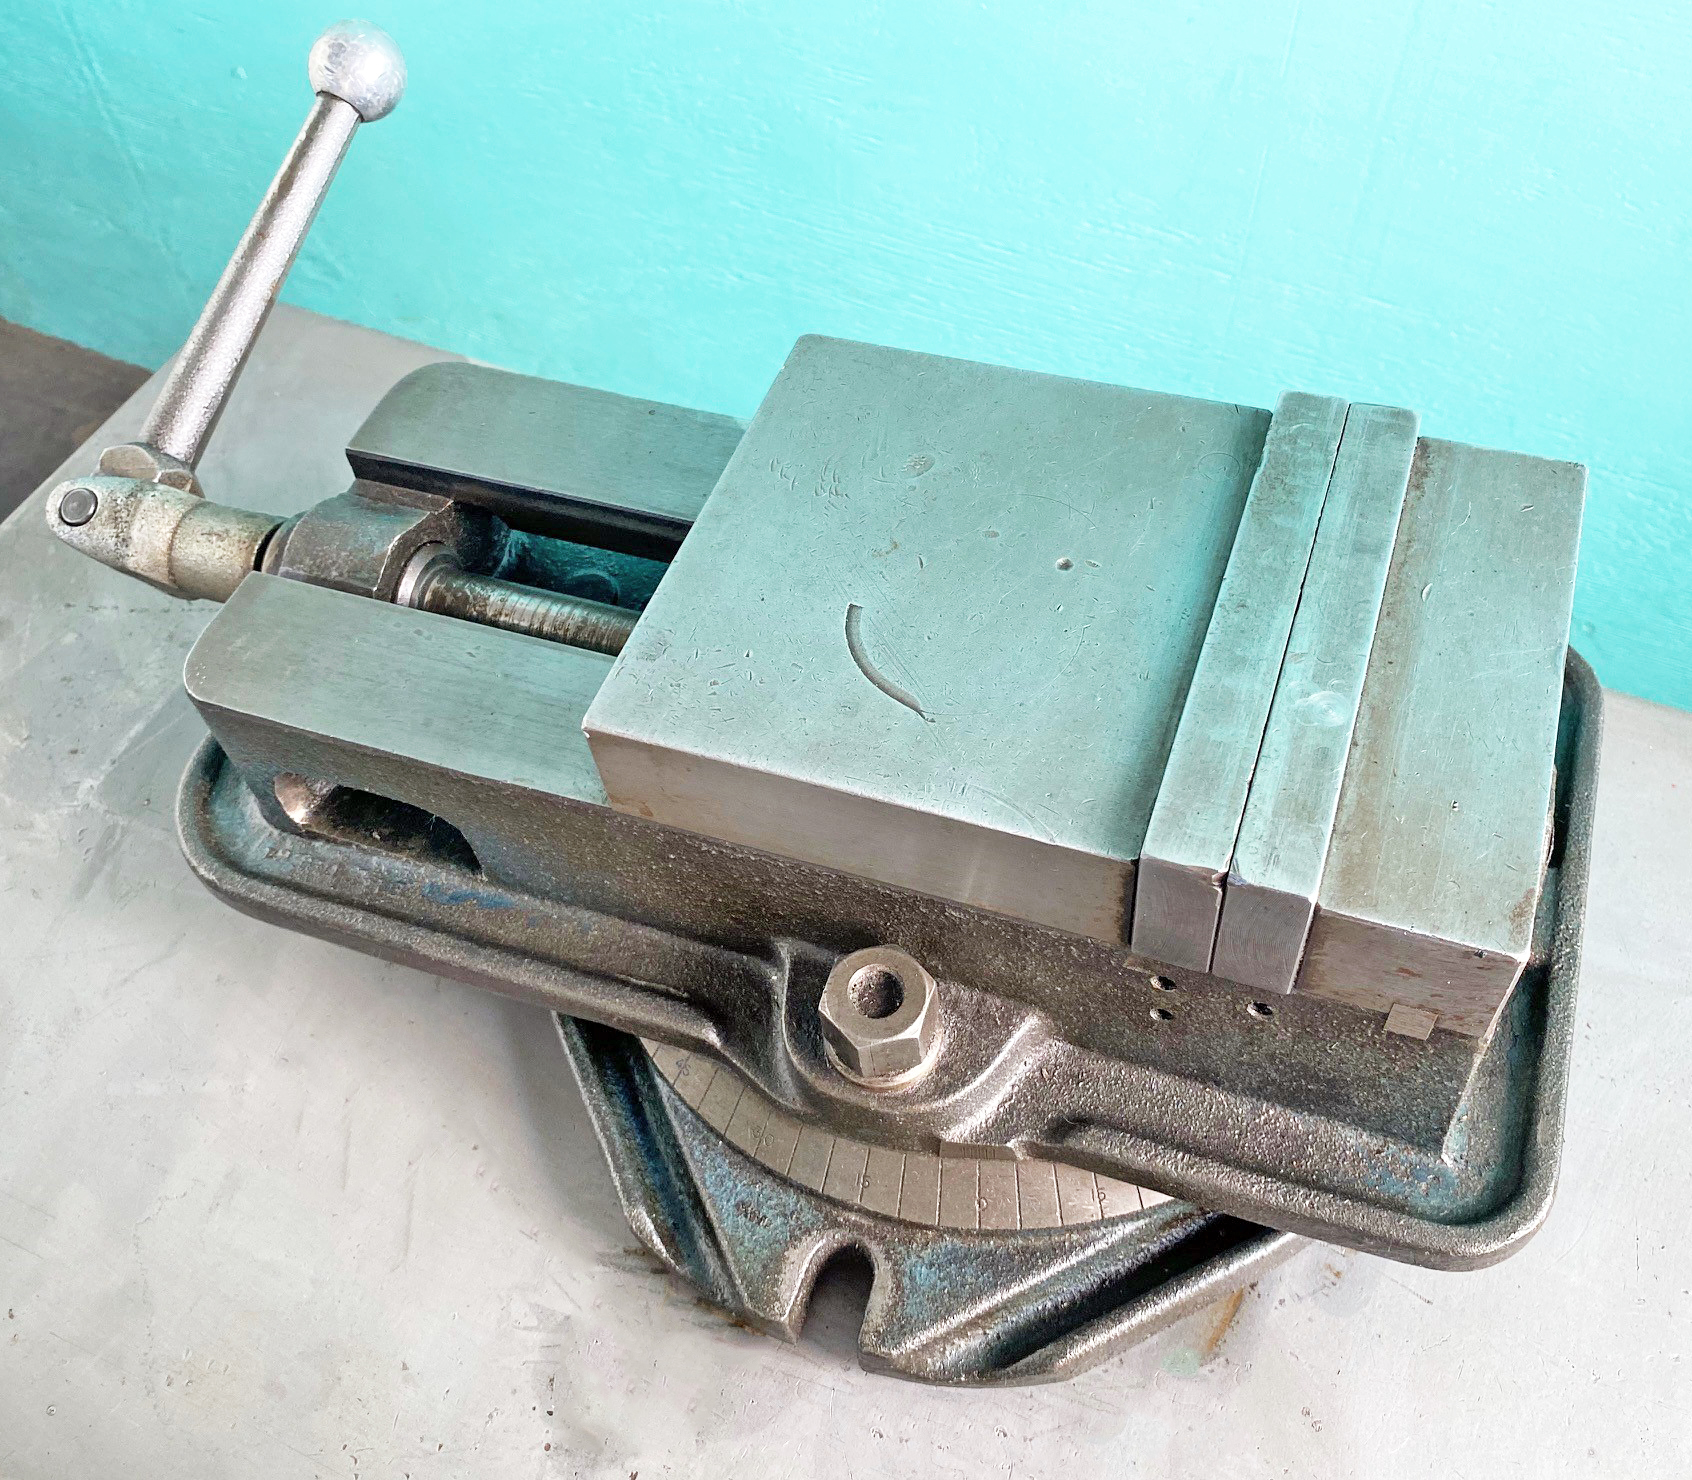 Kurt 6" AngLock Milling Vise with Swivel Base, D60 Norman Machine Tool